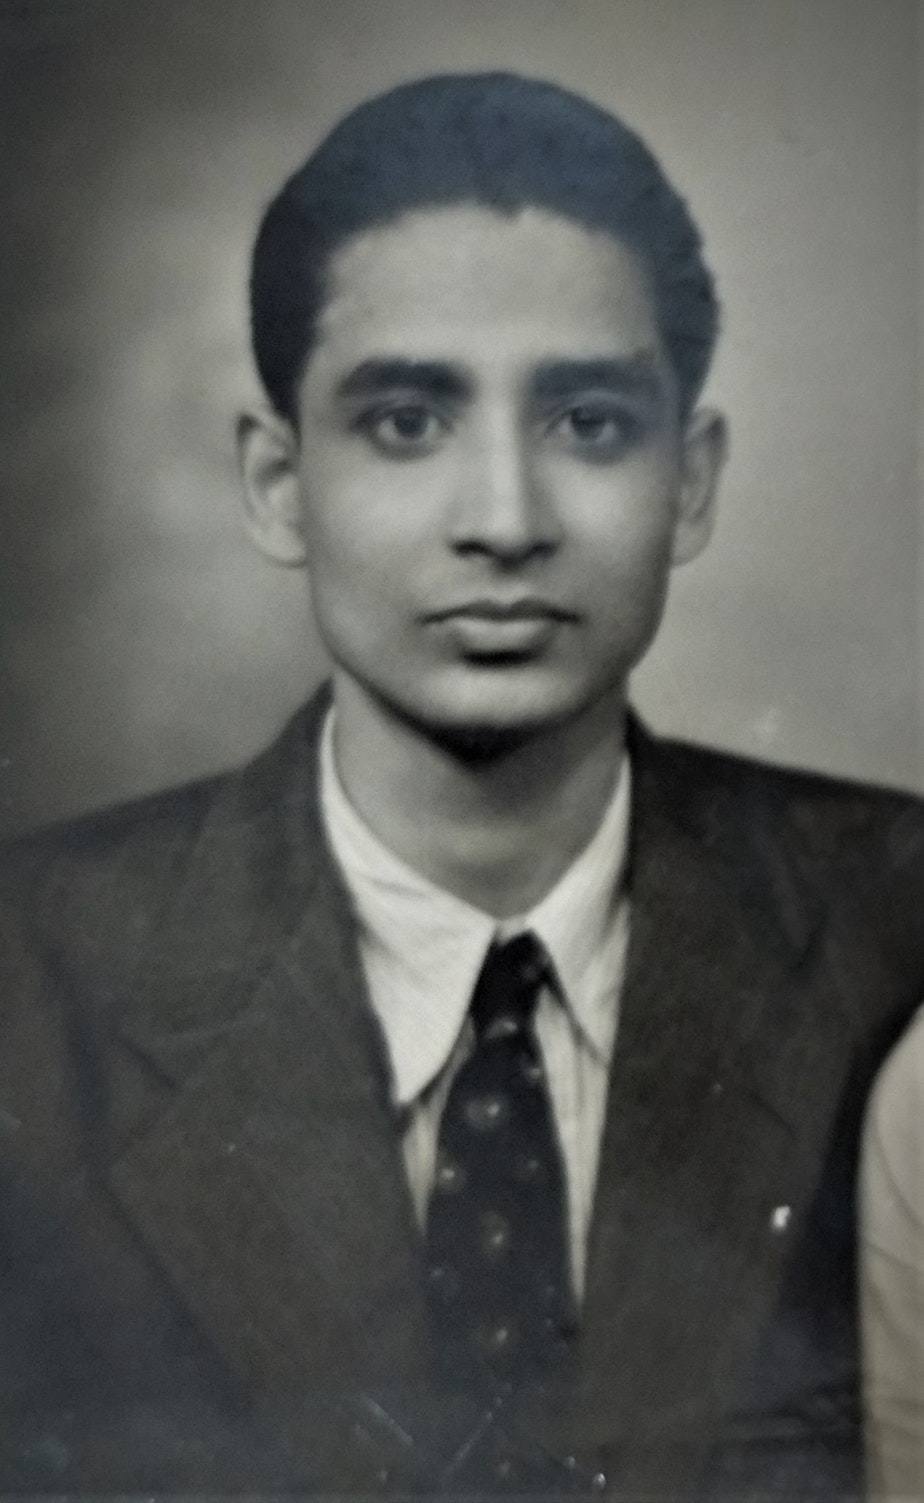 caption: The oldest photograph of the author's grandfather, or thatha in Tamil, taken on his wedding day, about seven years after India’s independence in 1947.